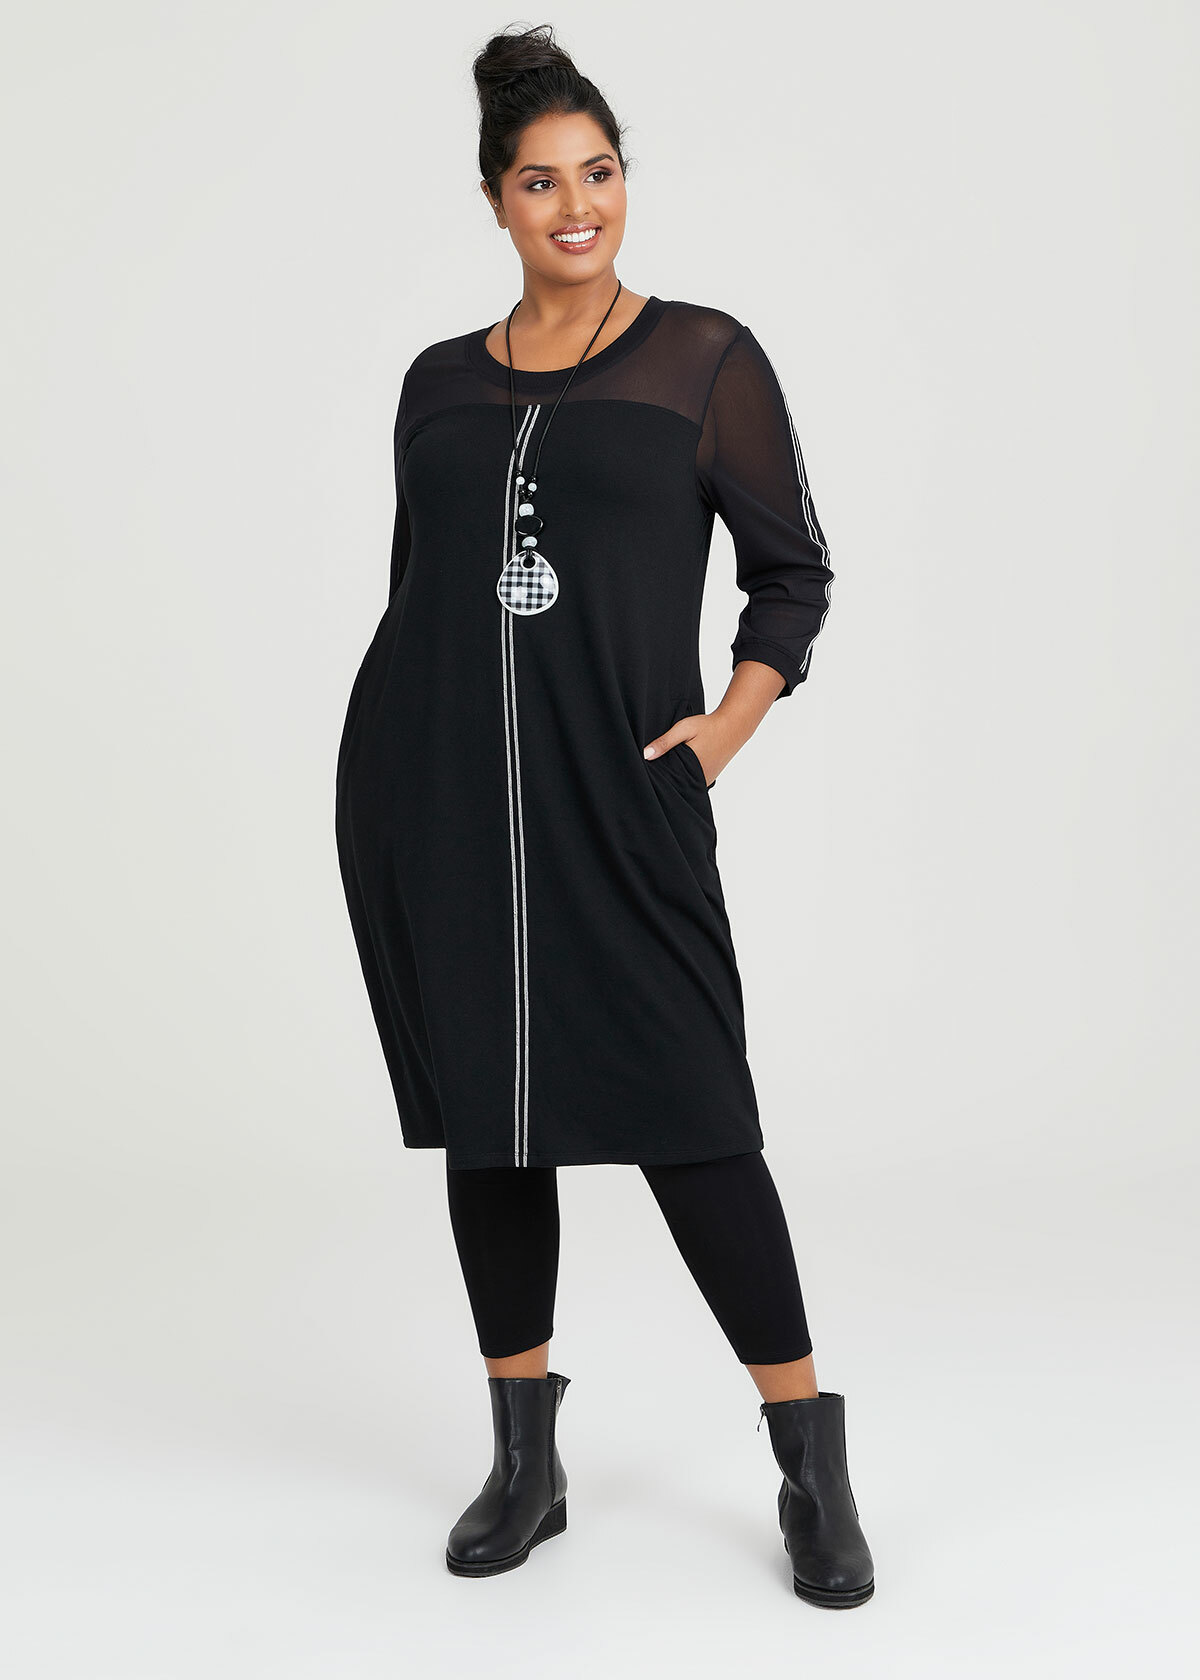 Shop Plus Size Natural Come Together Dress in Black | Sizes 12-30 ...